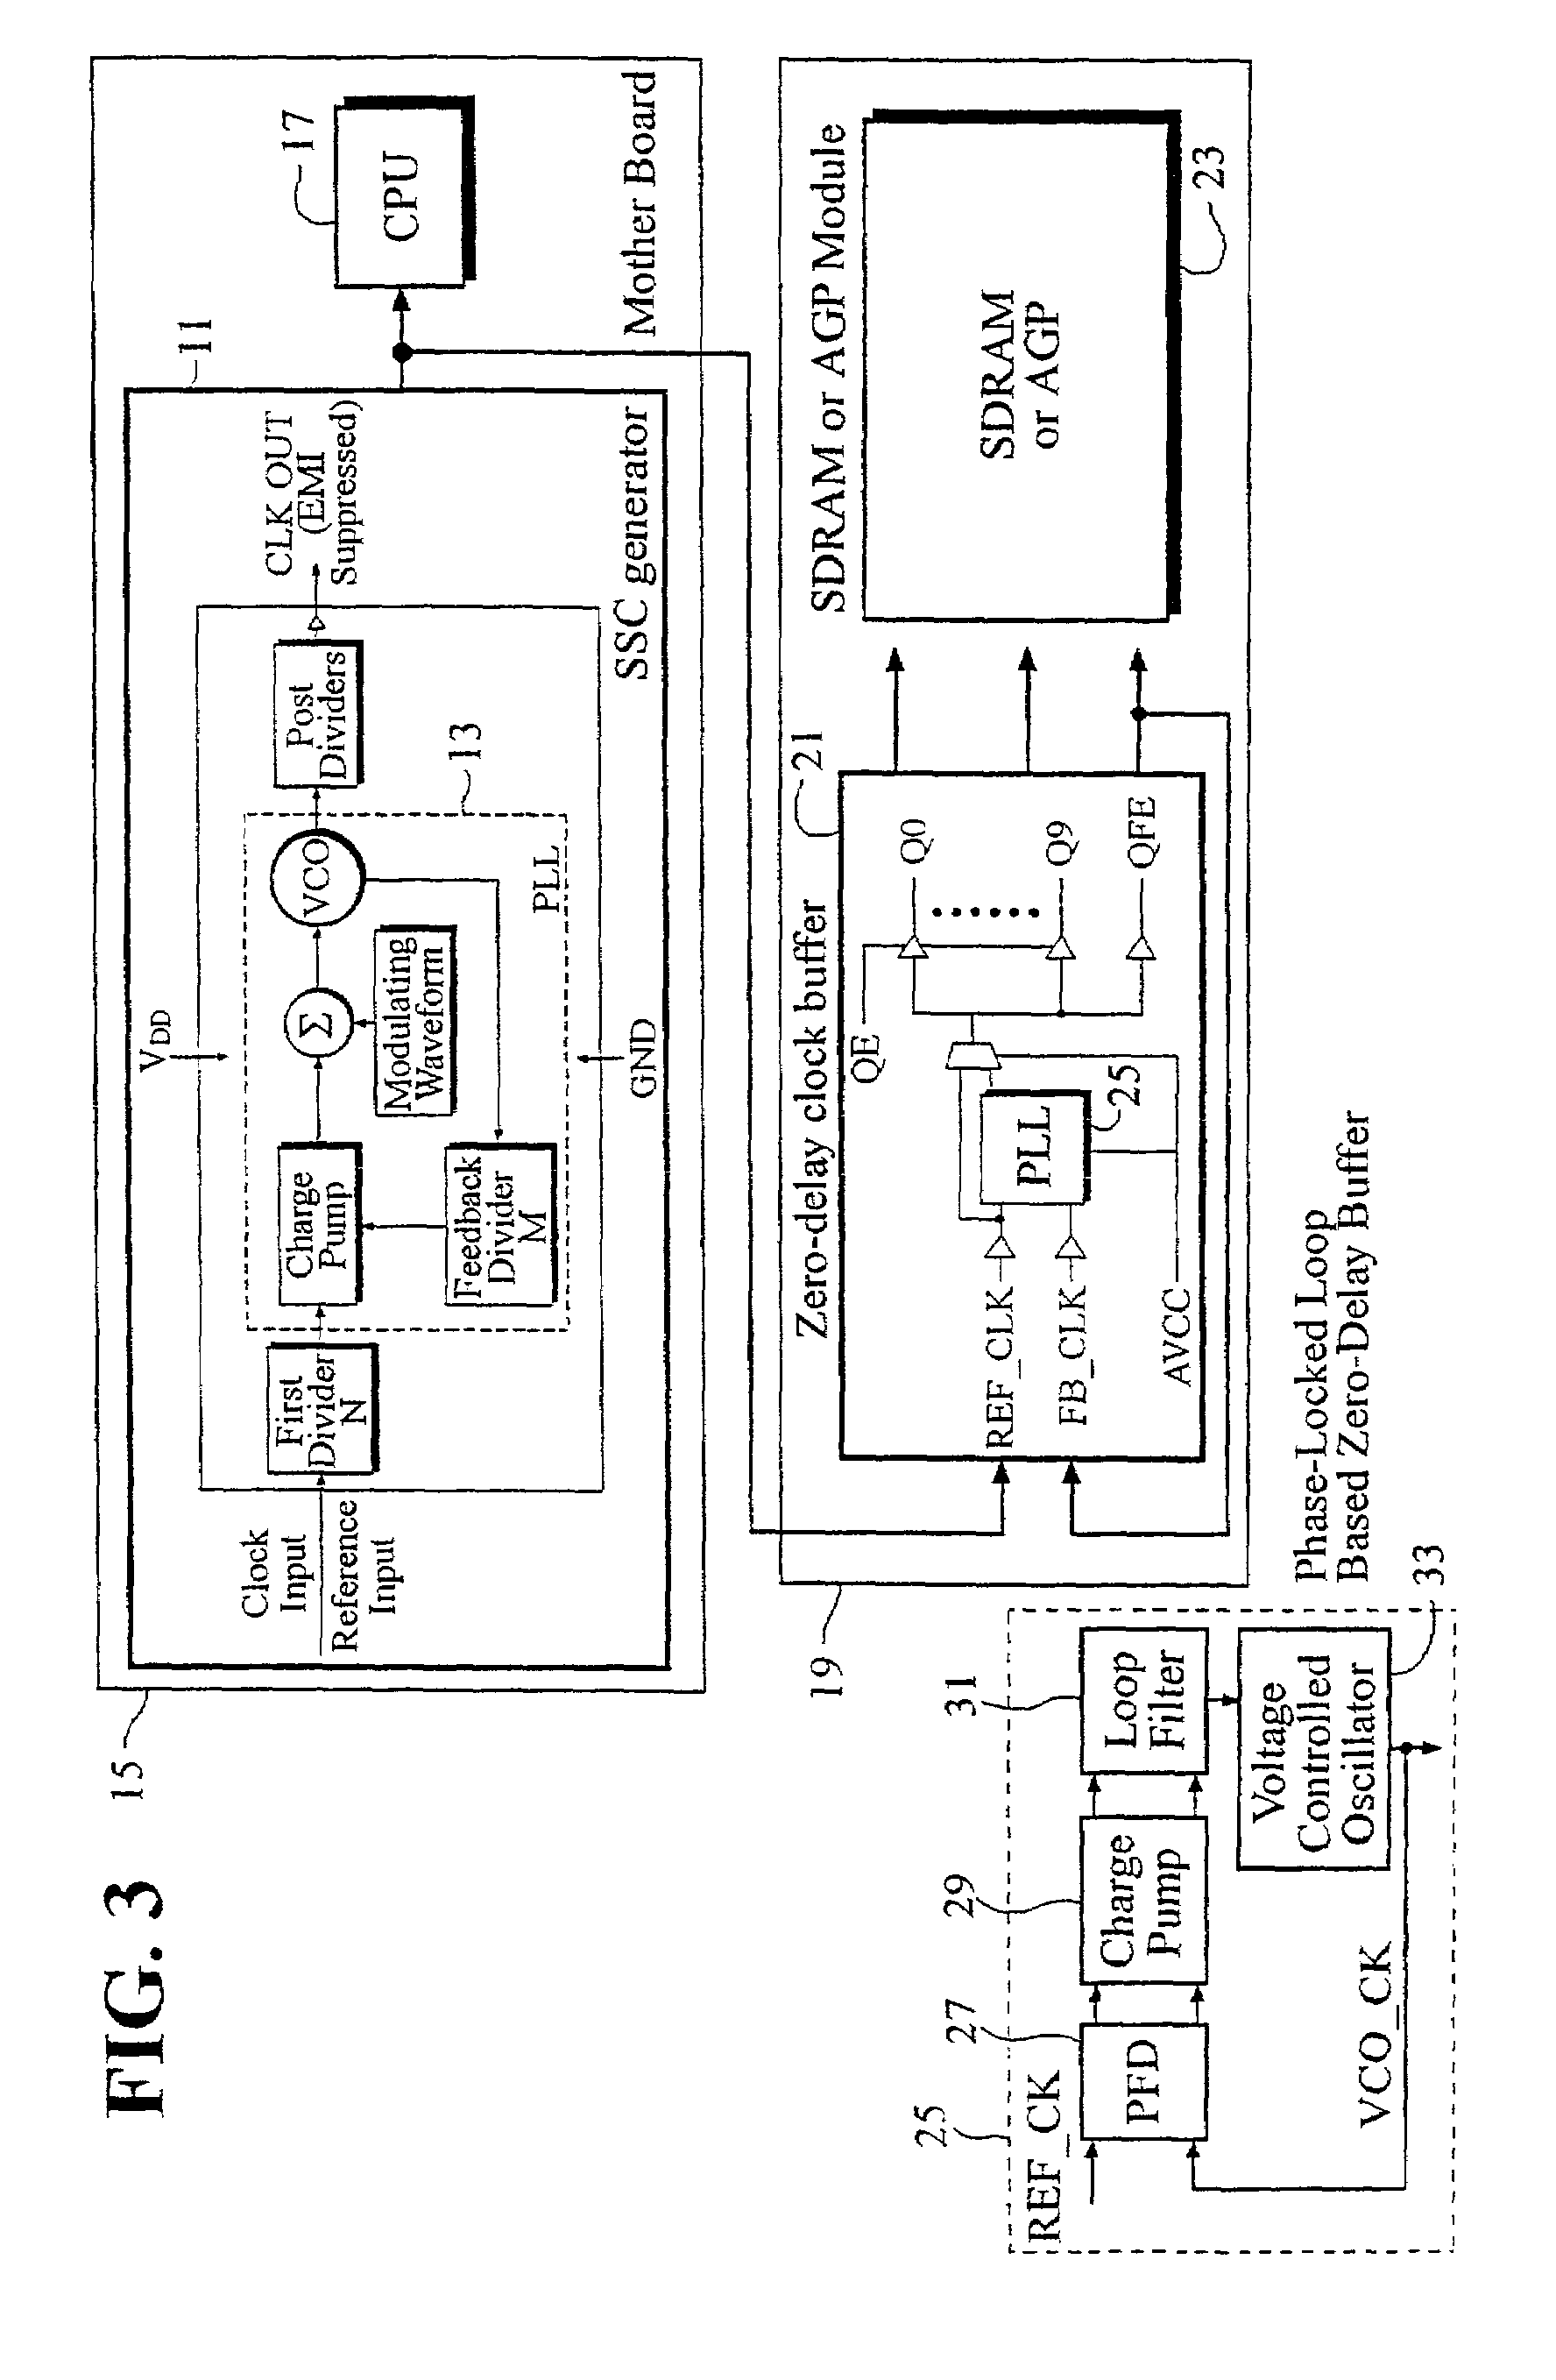 Zero-delay buffer circuit for a spread spectrum clock system and method therefor